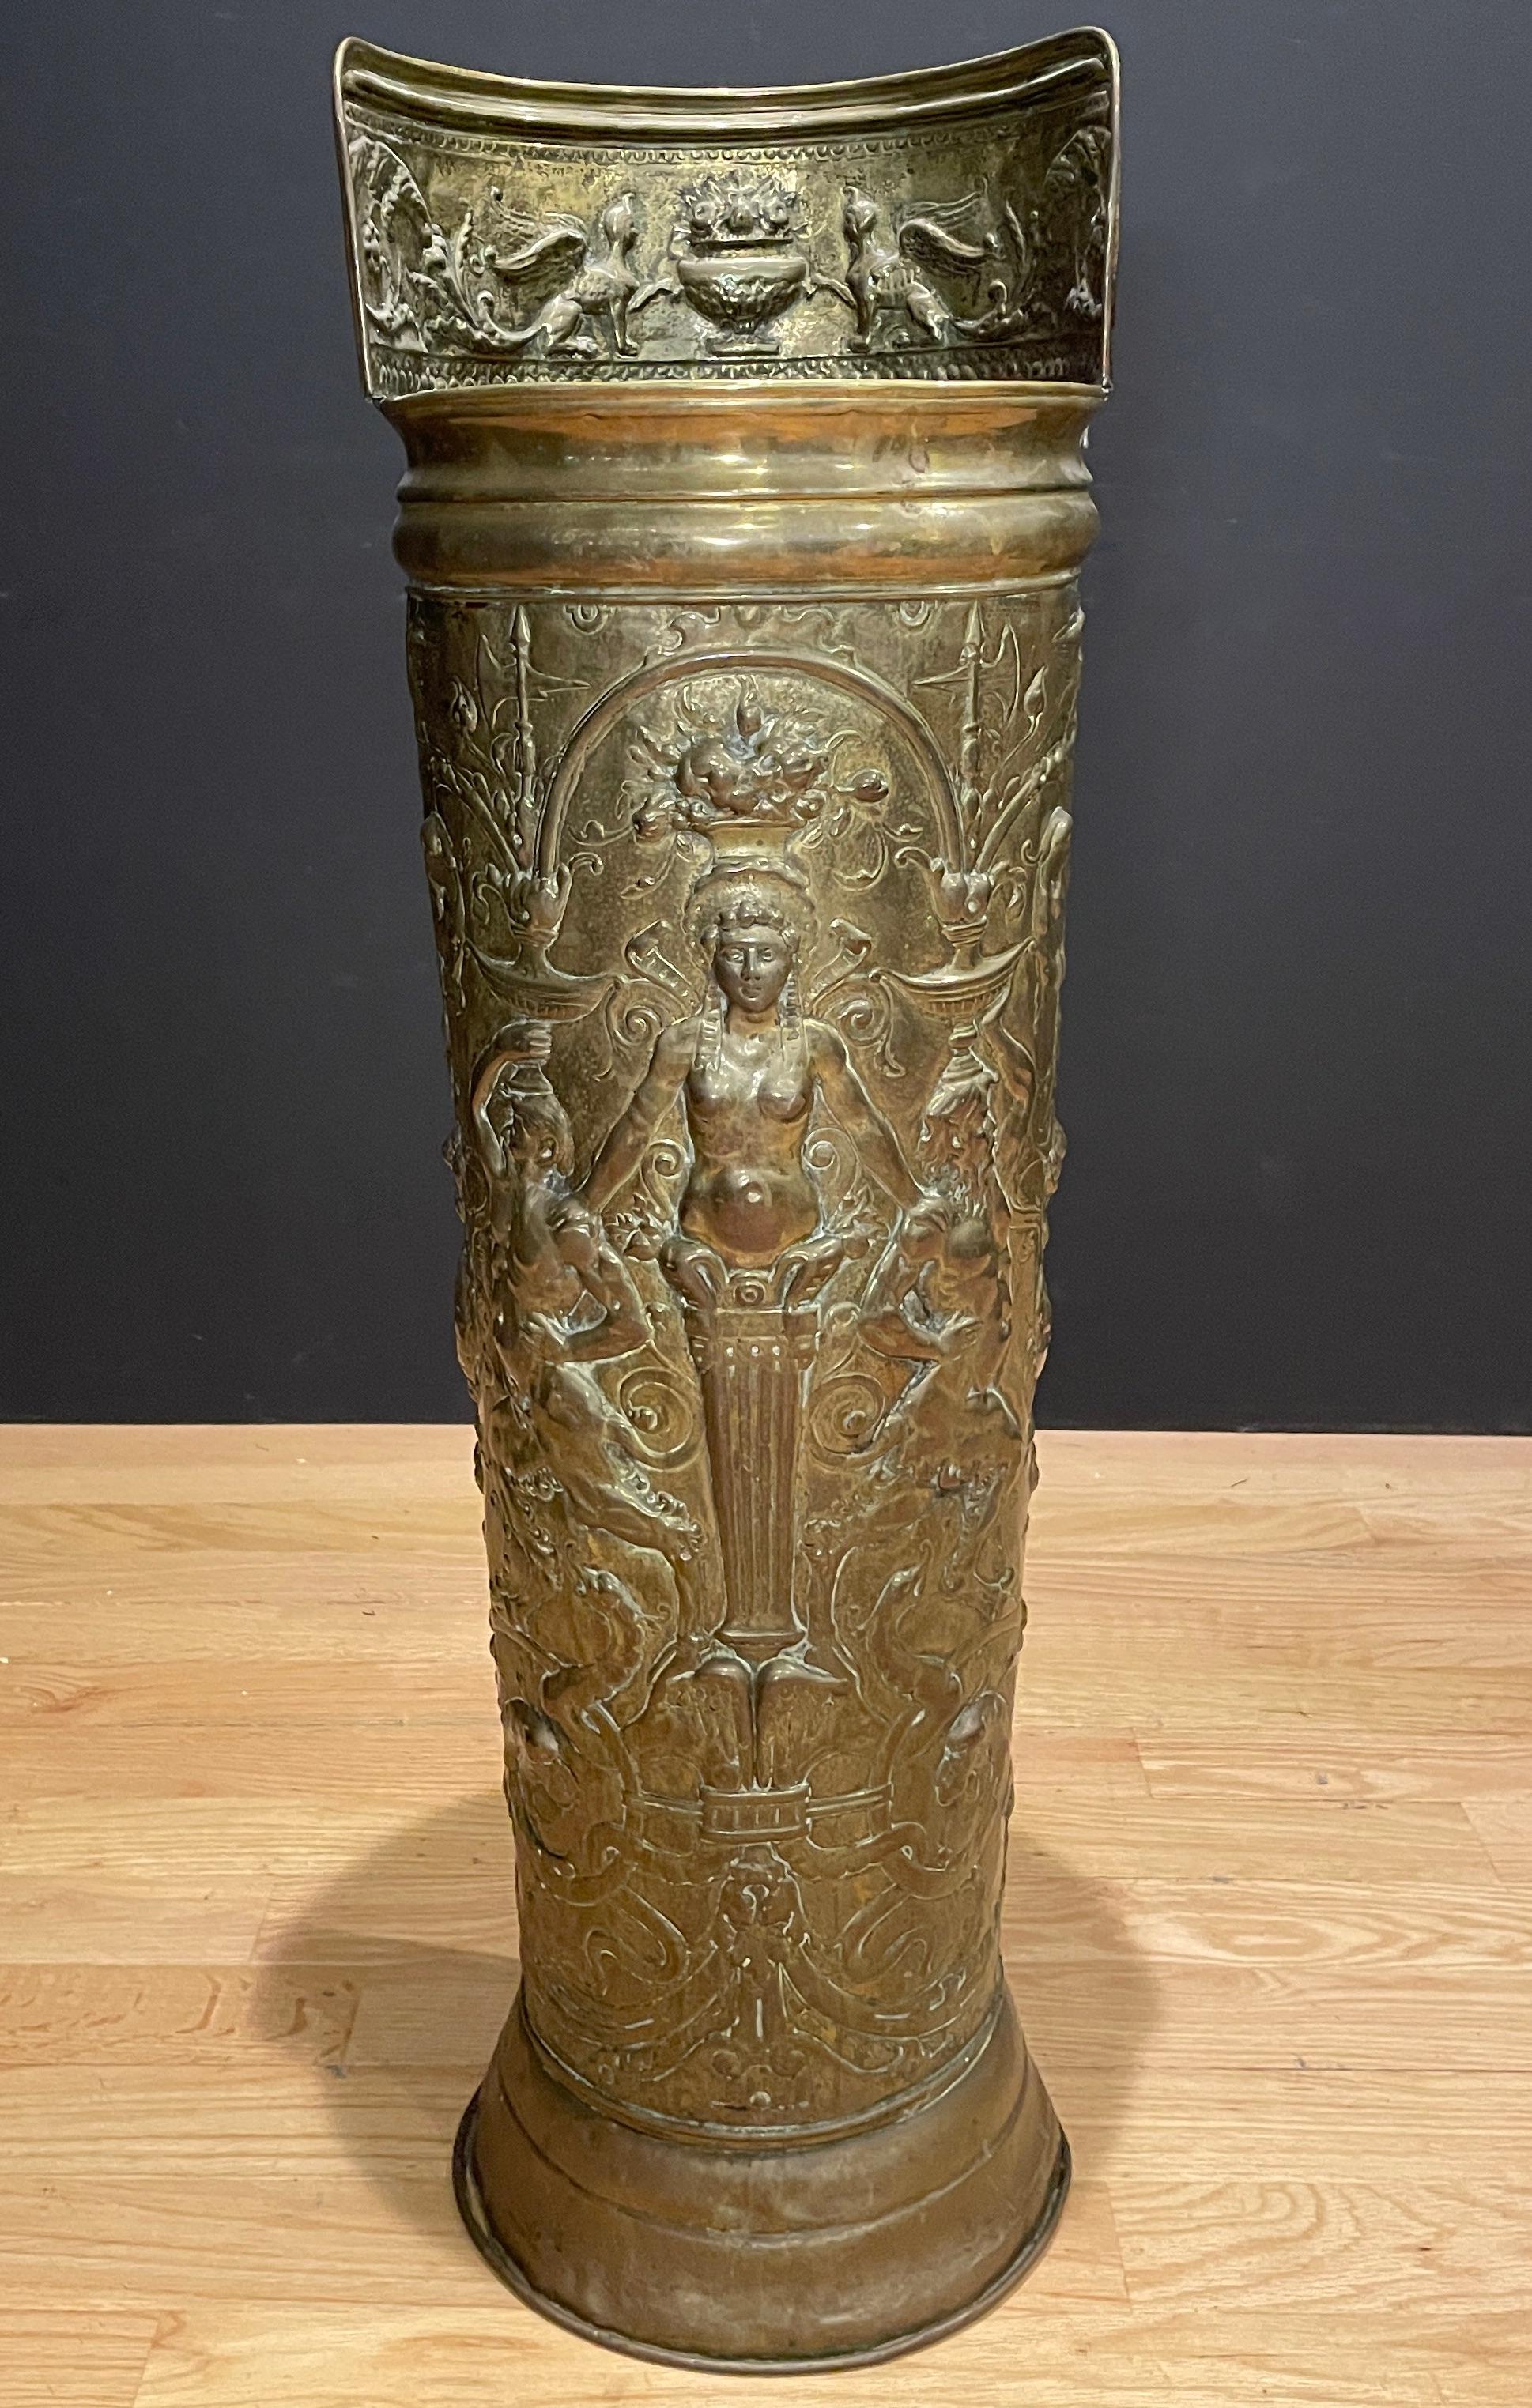 This versatile antique French repousse brass umbrella holder is one of the larger and more detailed models that we have found over the years. Its pronounced motifs have been done in relief and include a Caryatid surrounded by scrolling rinceau and